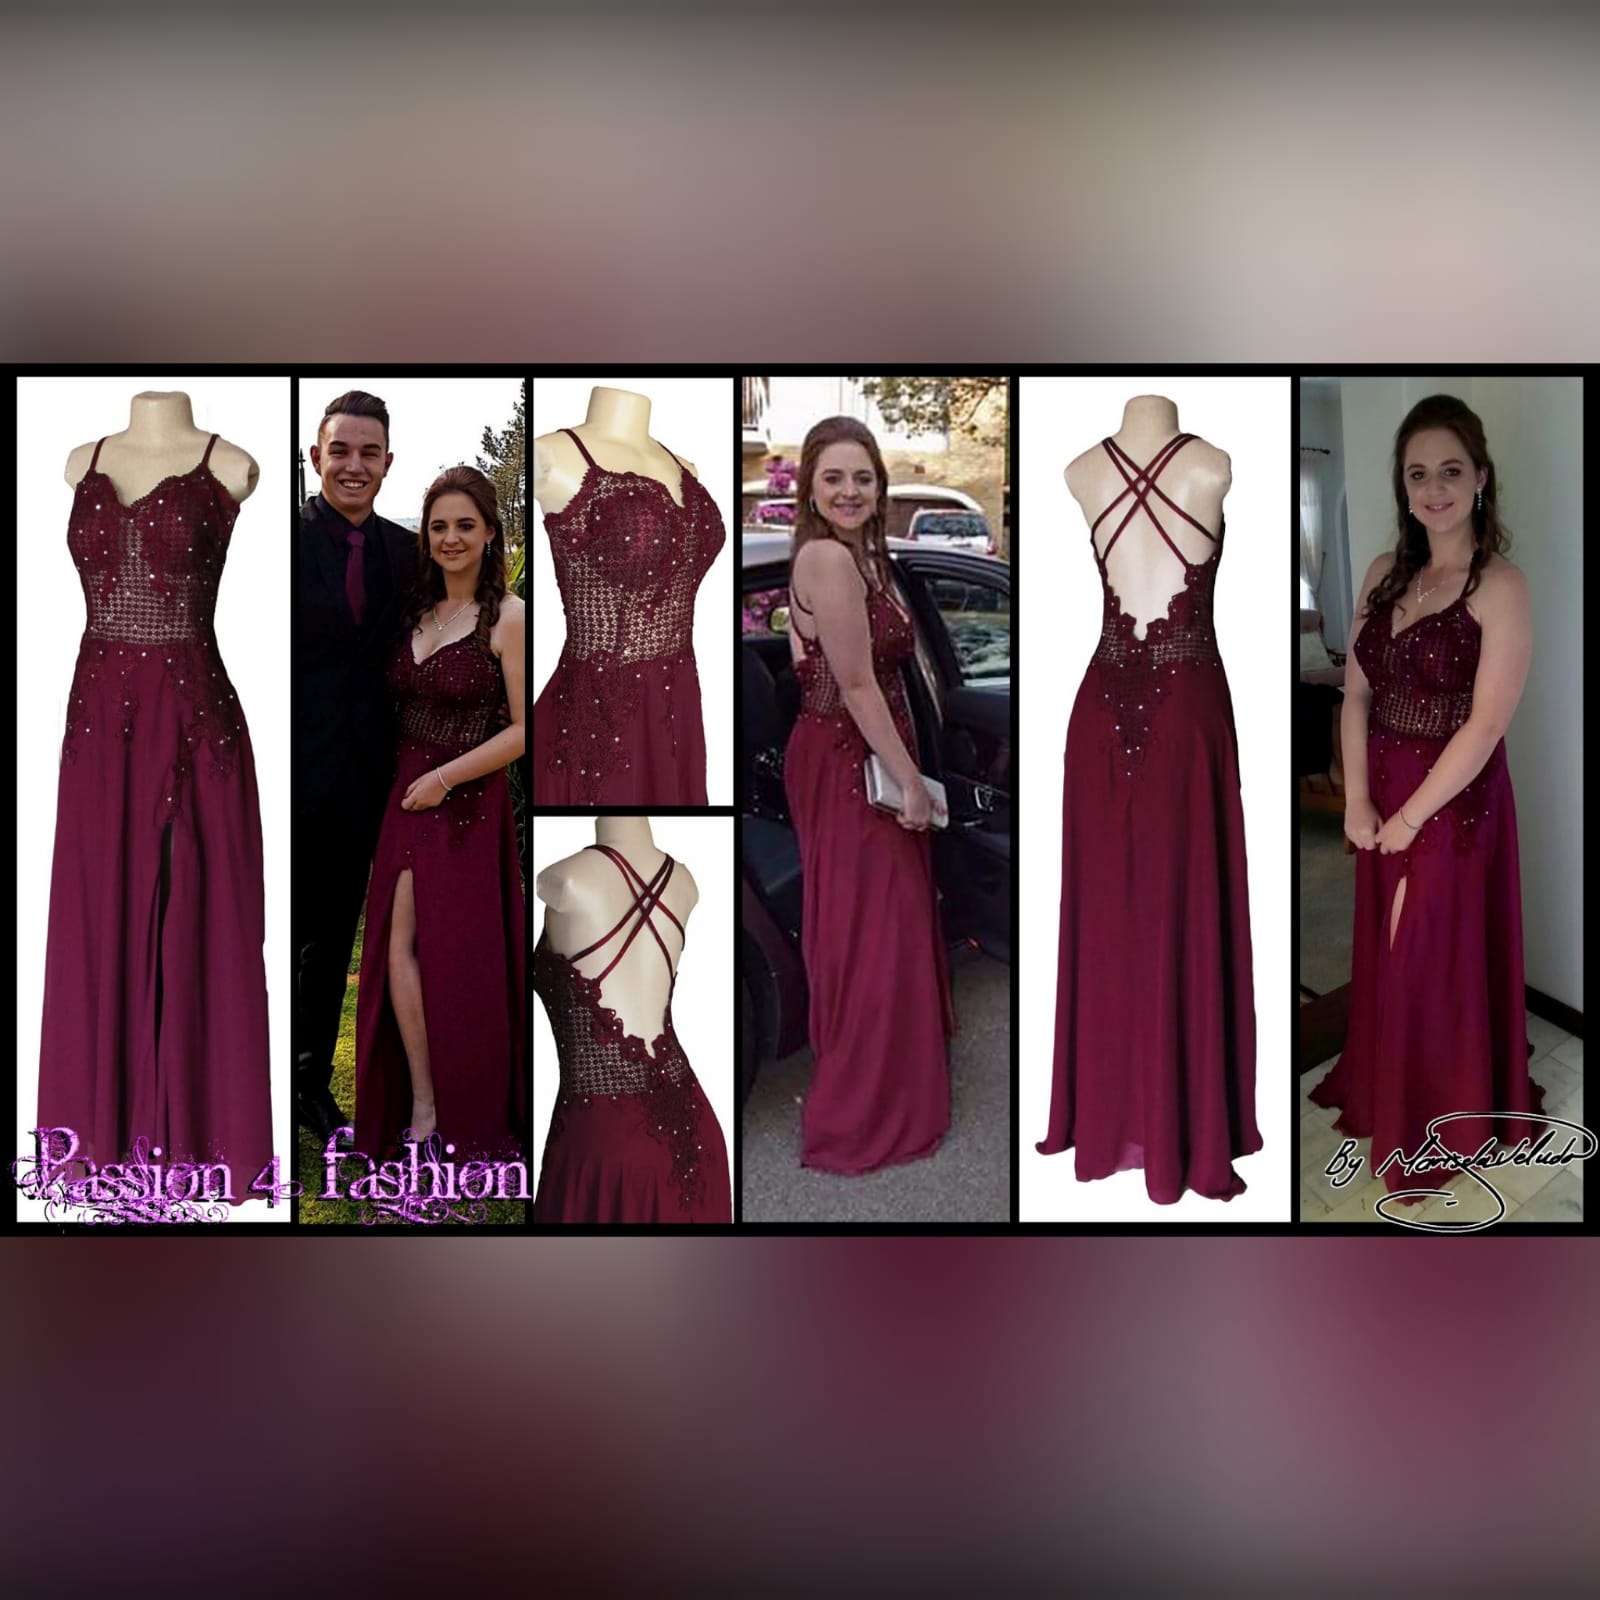 Burgundy chiffon and lace matric dance dress 5 burgundy chiffon and lace matric farewell dress. Bodice in lace, with a v neckline and v low open back, with double shoulder crossed straps. Bodice detailed with silver beads. Bottom in flowy chiffon with a slit.